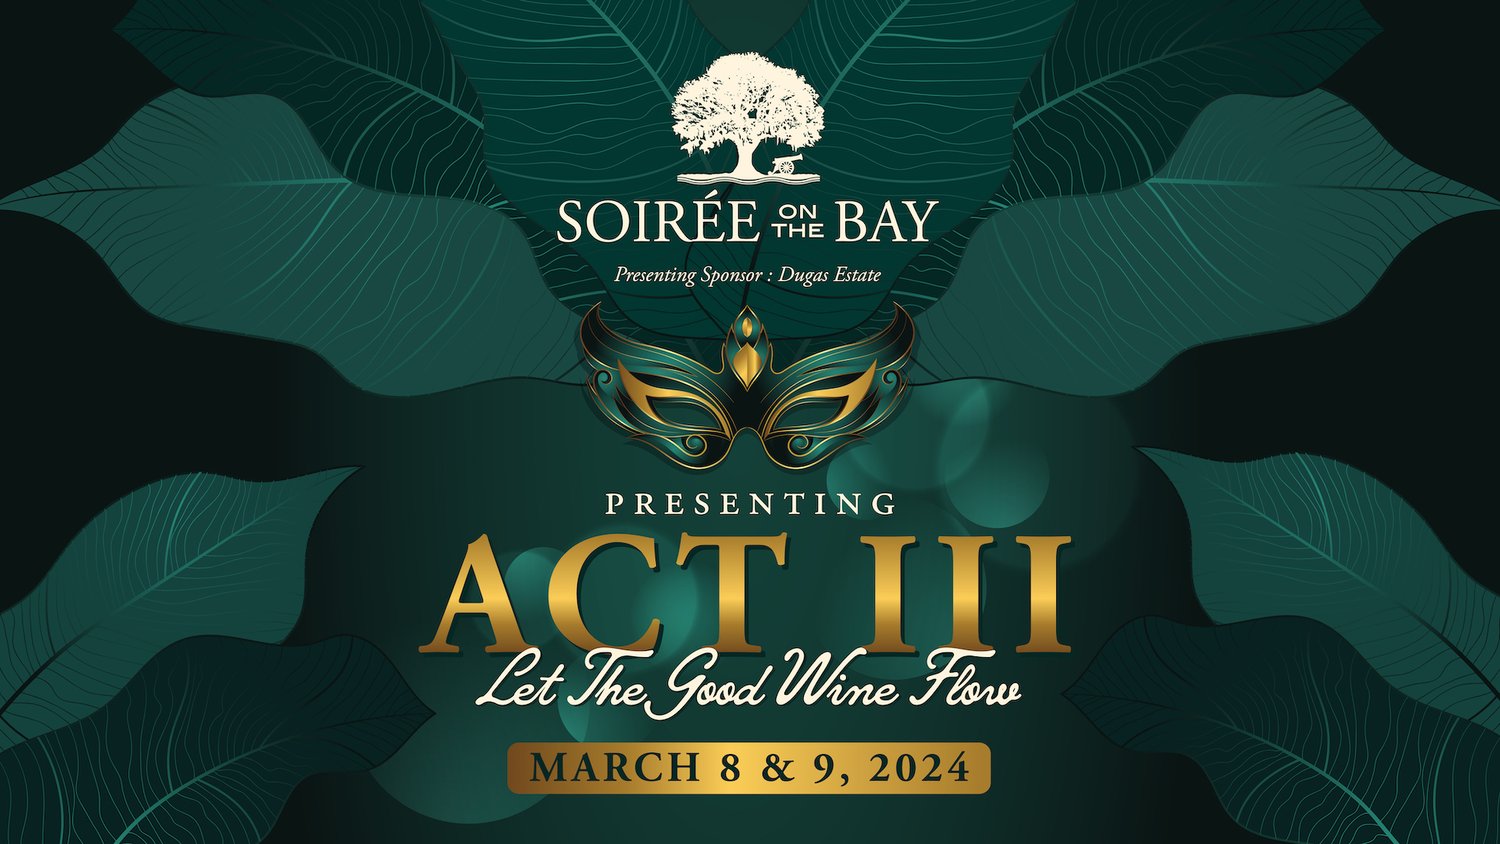 Soiree on the Bay: Act III for CVHN